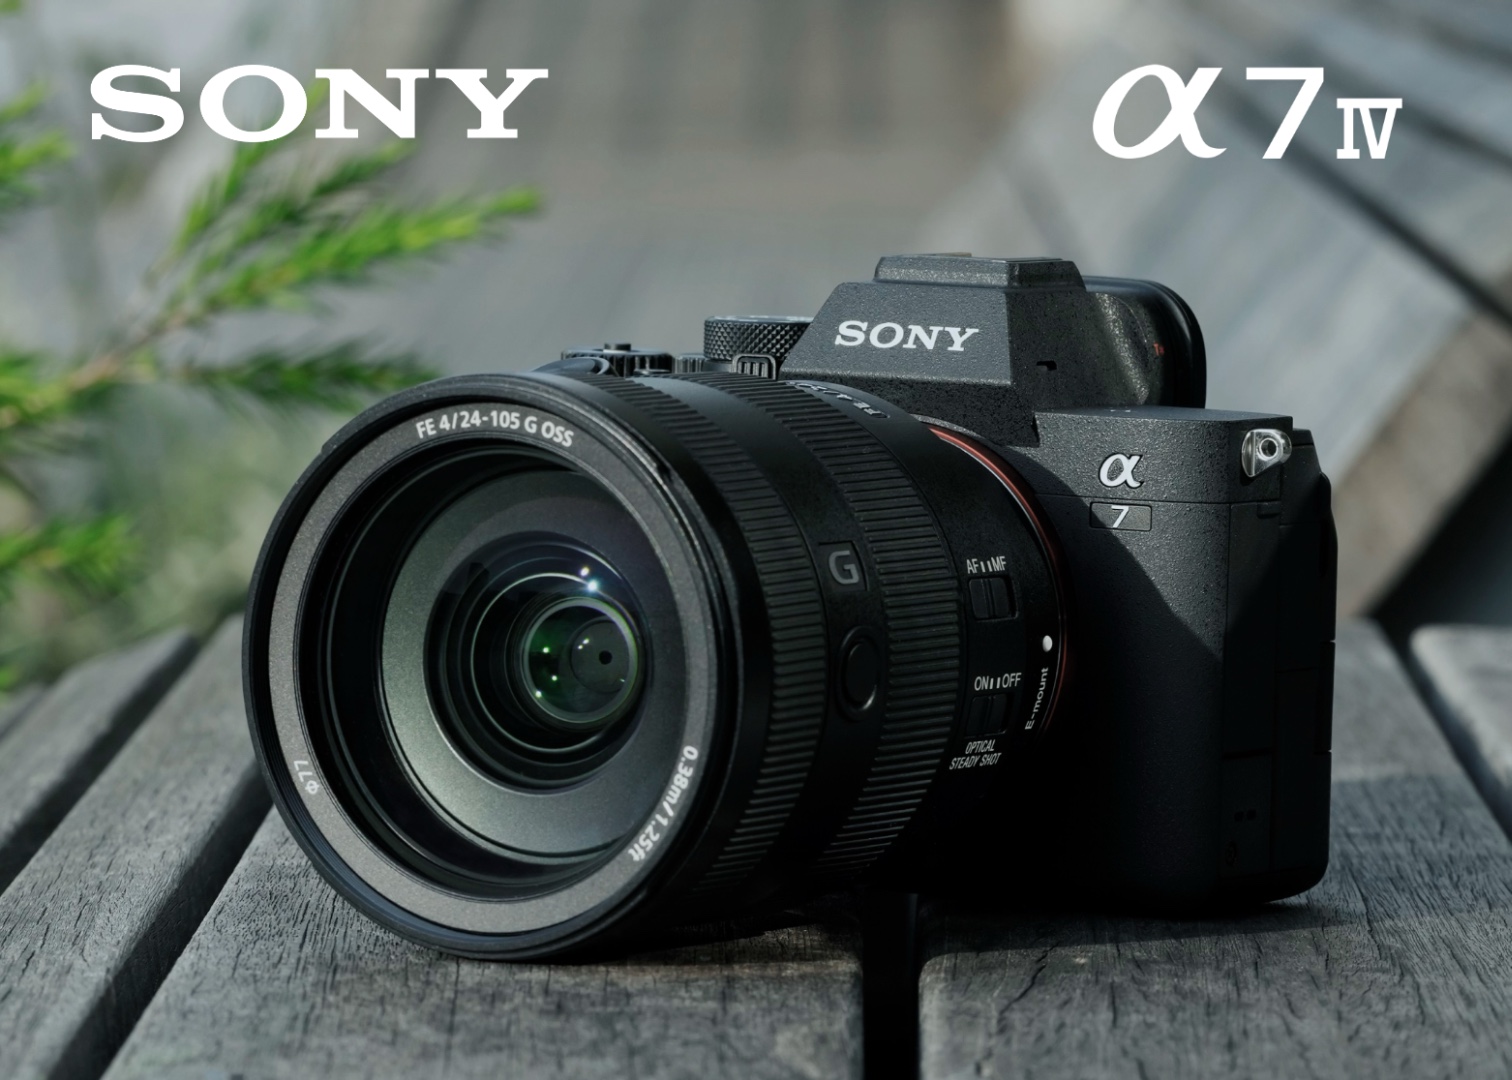 Exceptional promotion on the Sony A7 IV